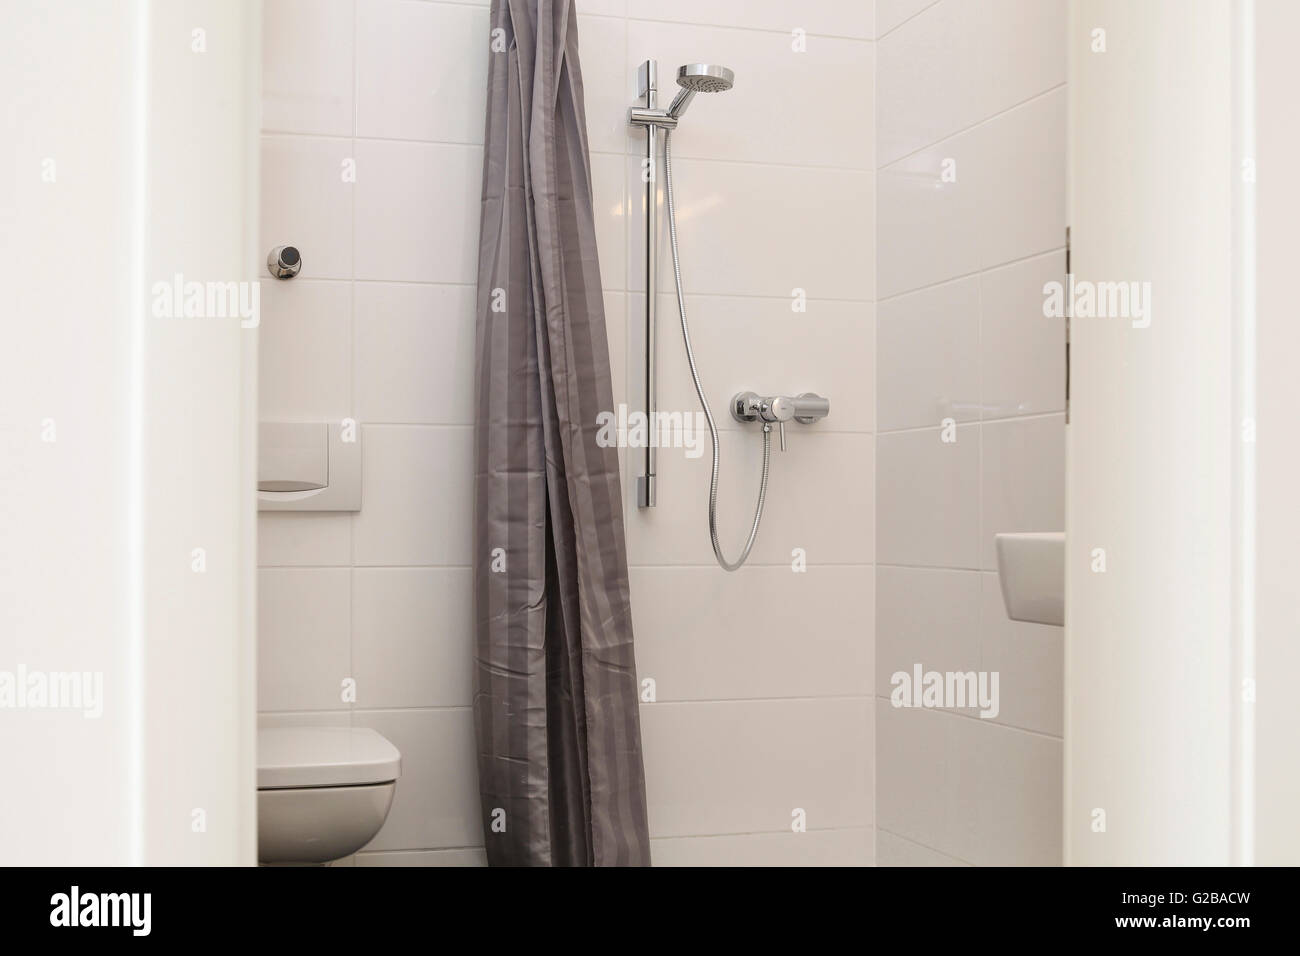 Conversion of Dach or Loft Space in Reichenberger Strasse, Kreuzberg. Partial view of a white bathroom. Stock Photo